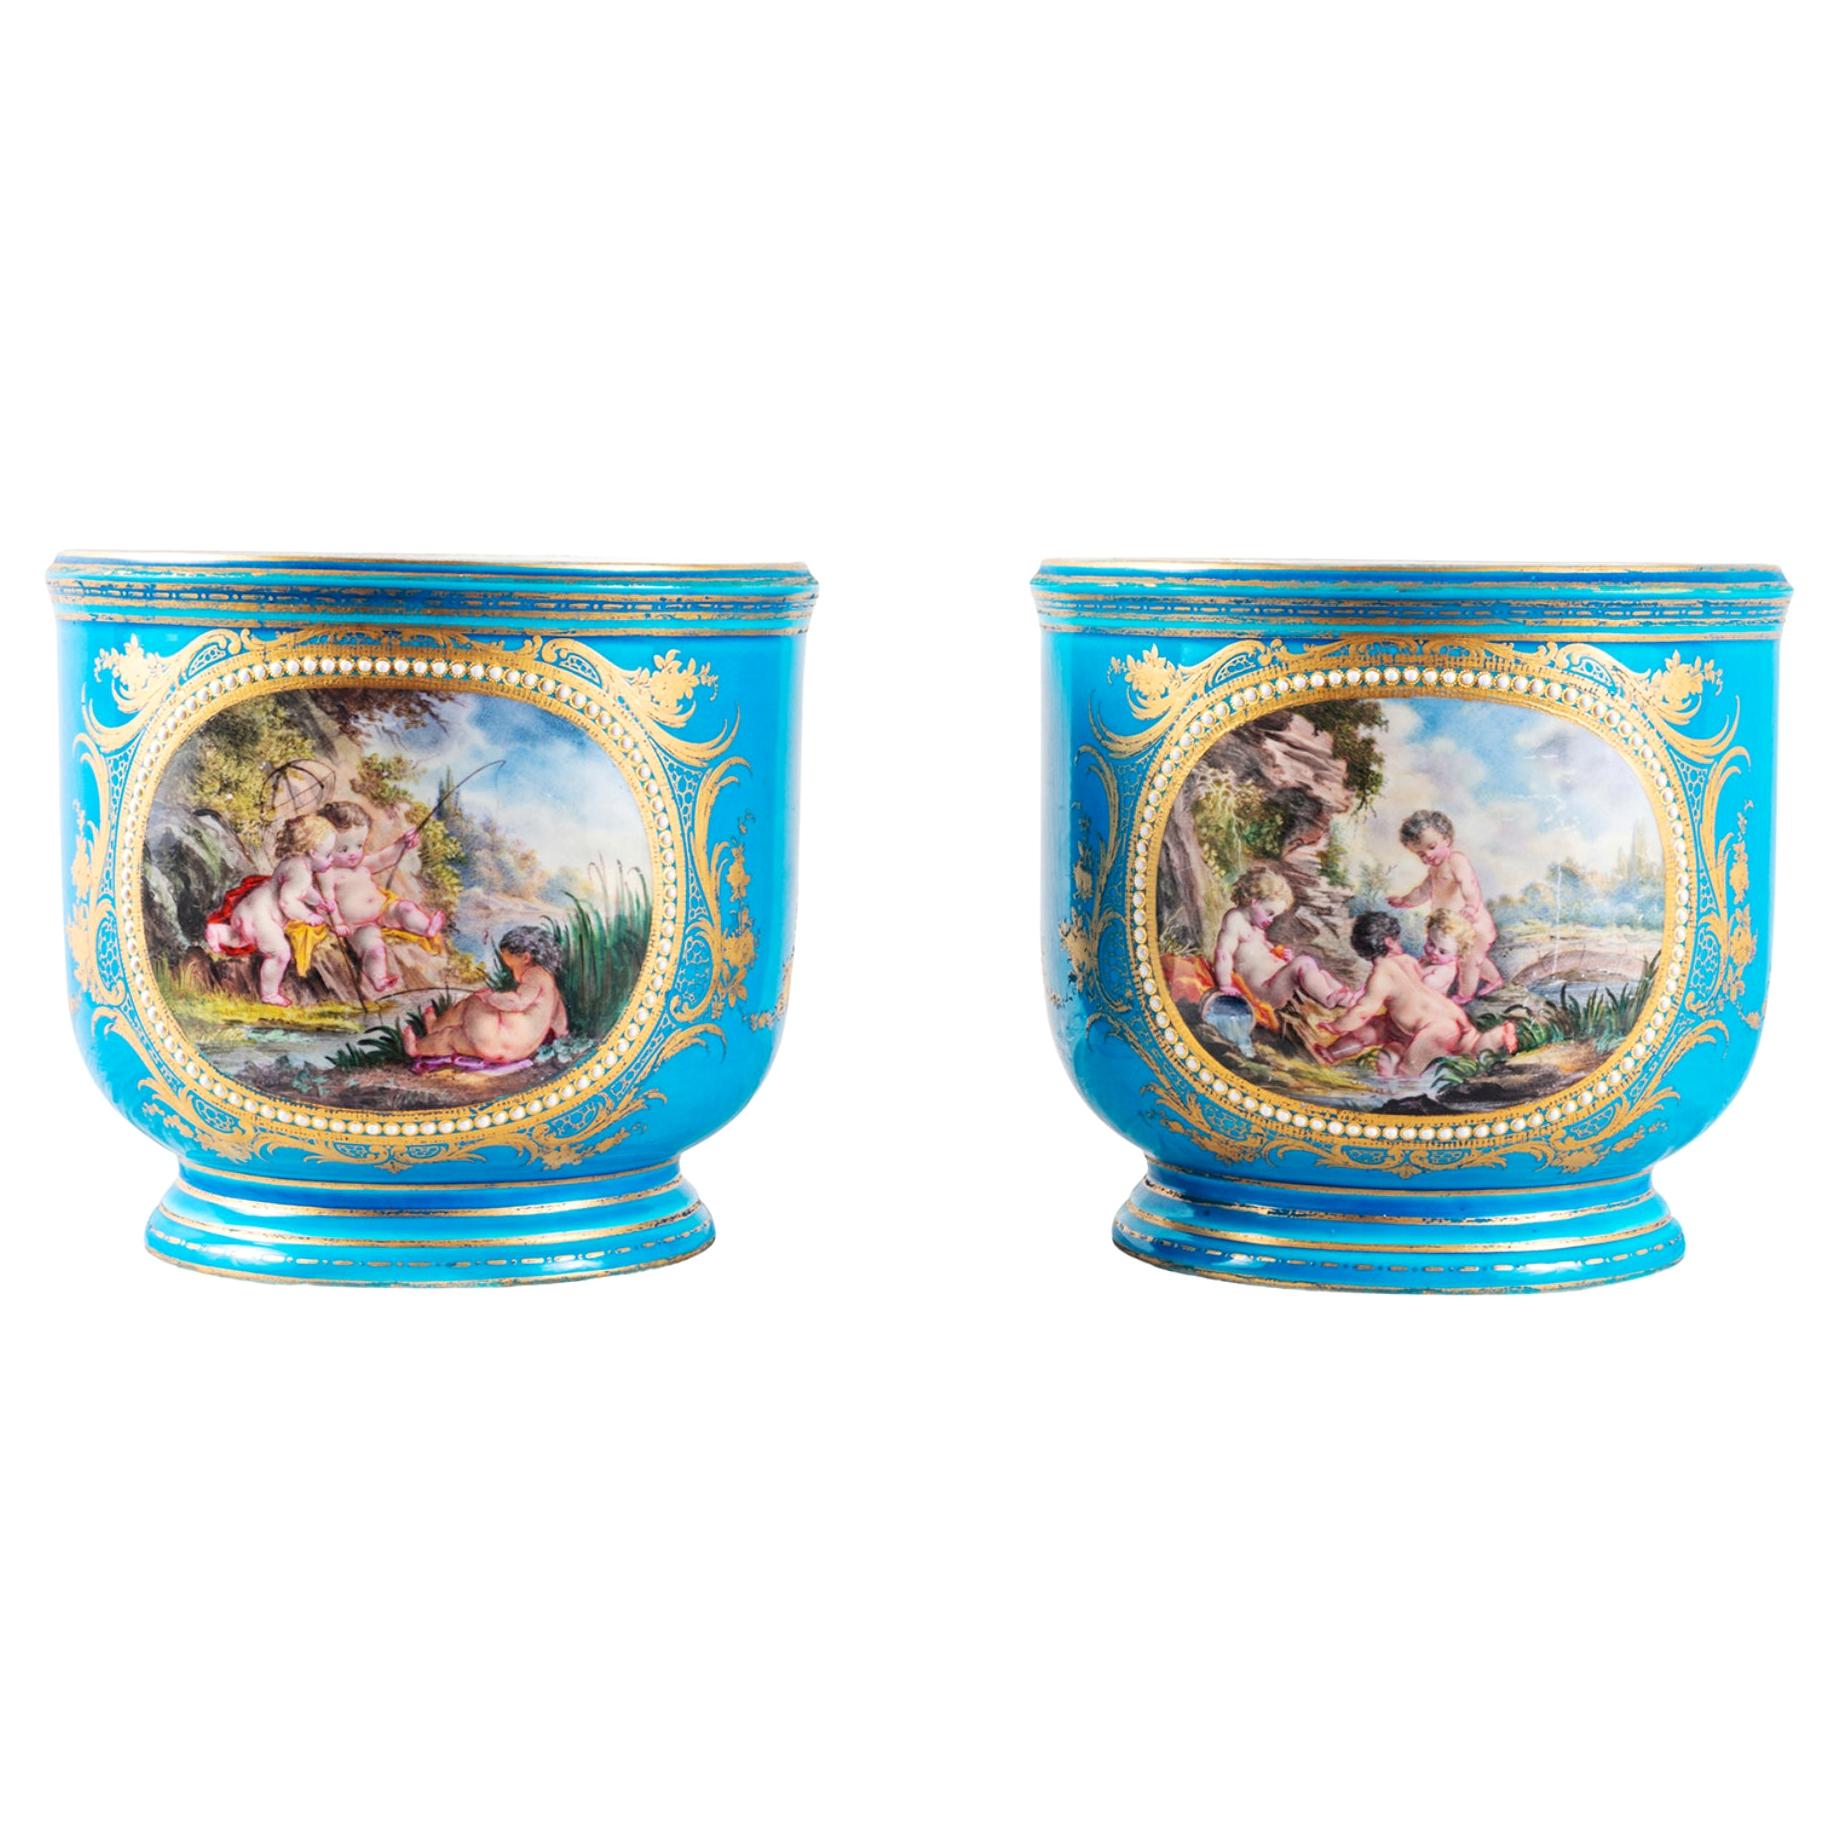 Pair of Sevres Style Porcelain Jardinieres, 19th Century